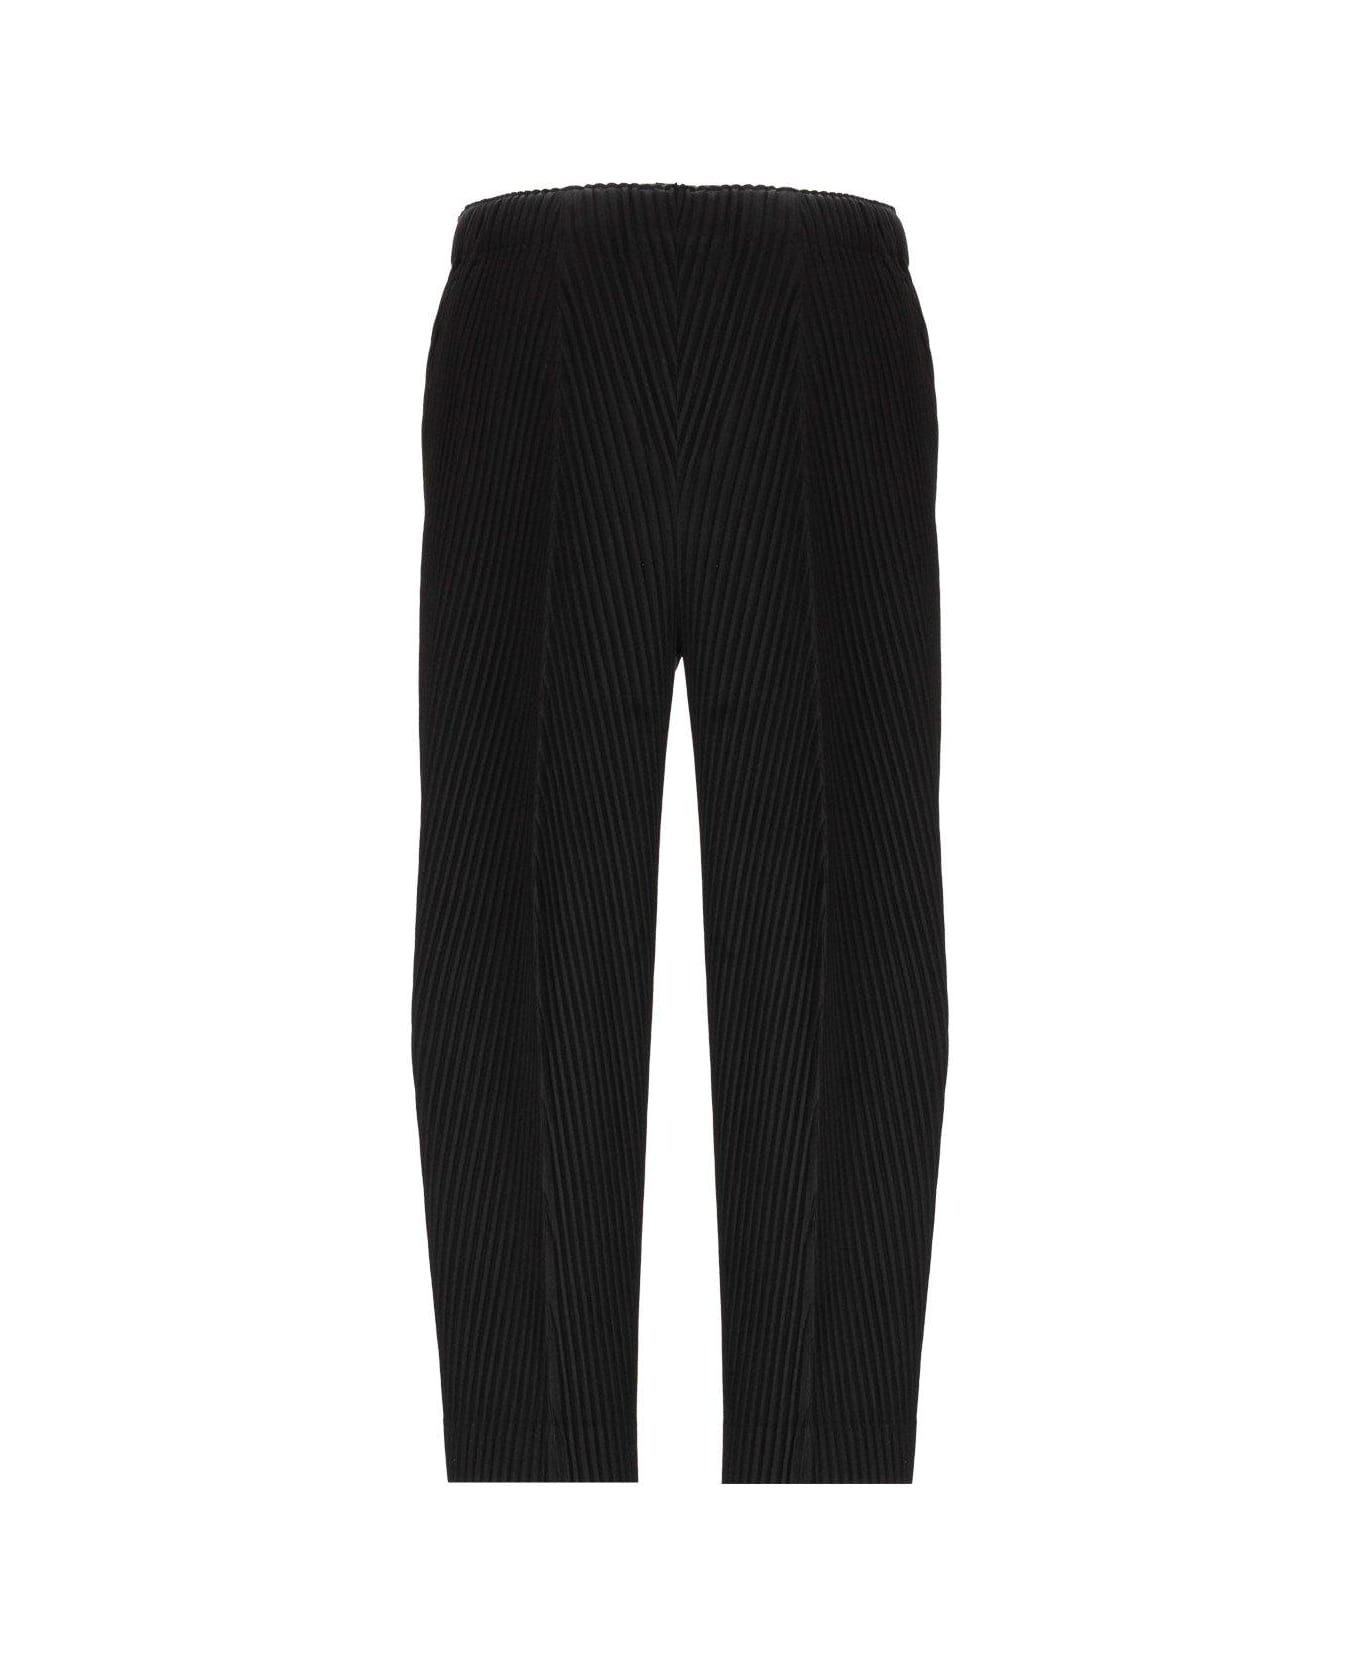 Homme Plissé Issey Miyake Pleated Cropped Trousers - Black ボトムス